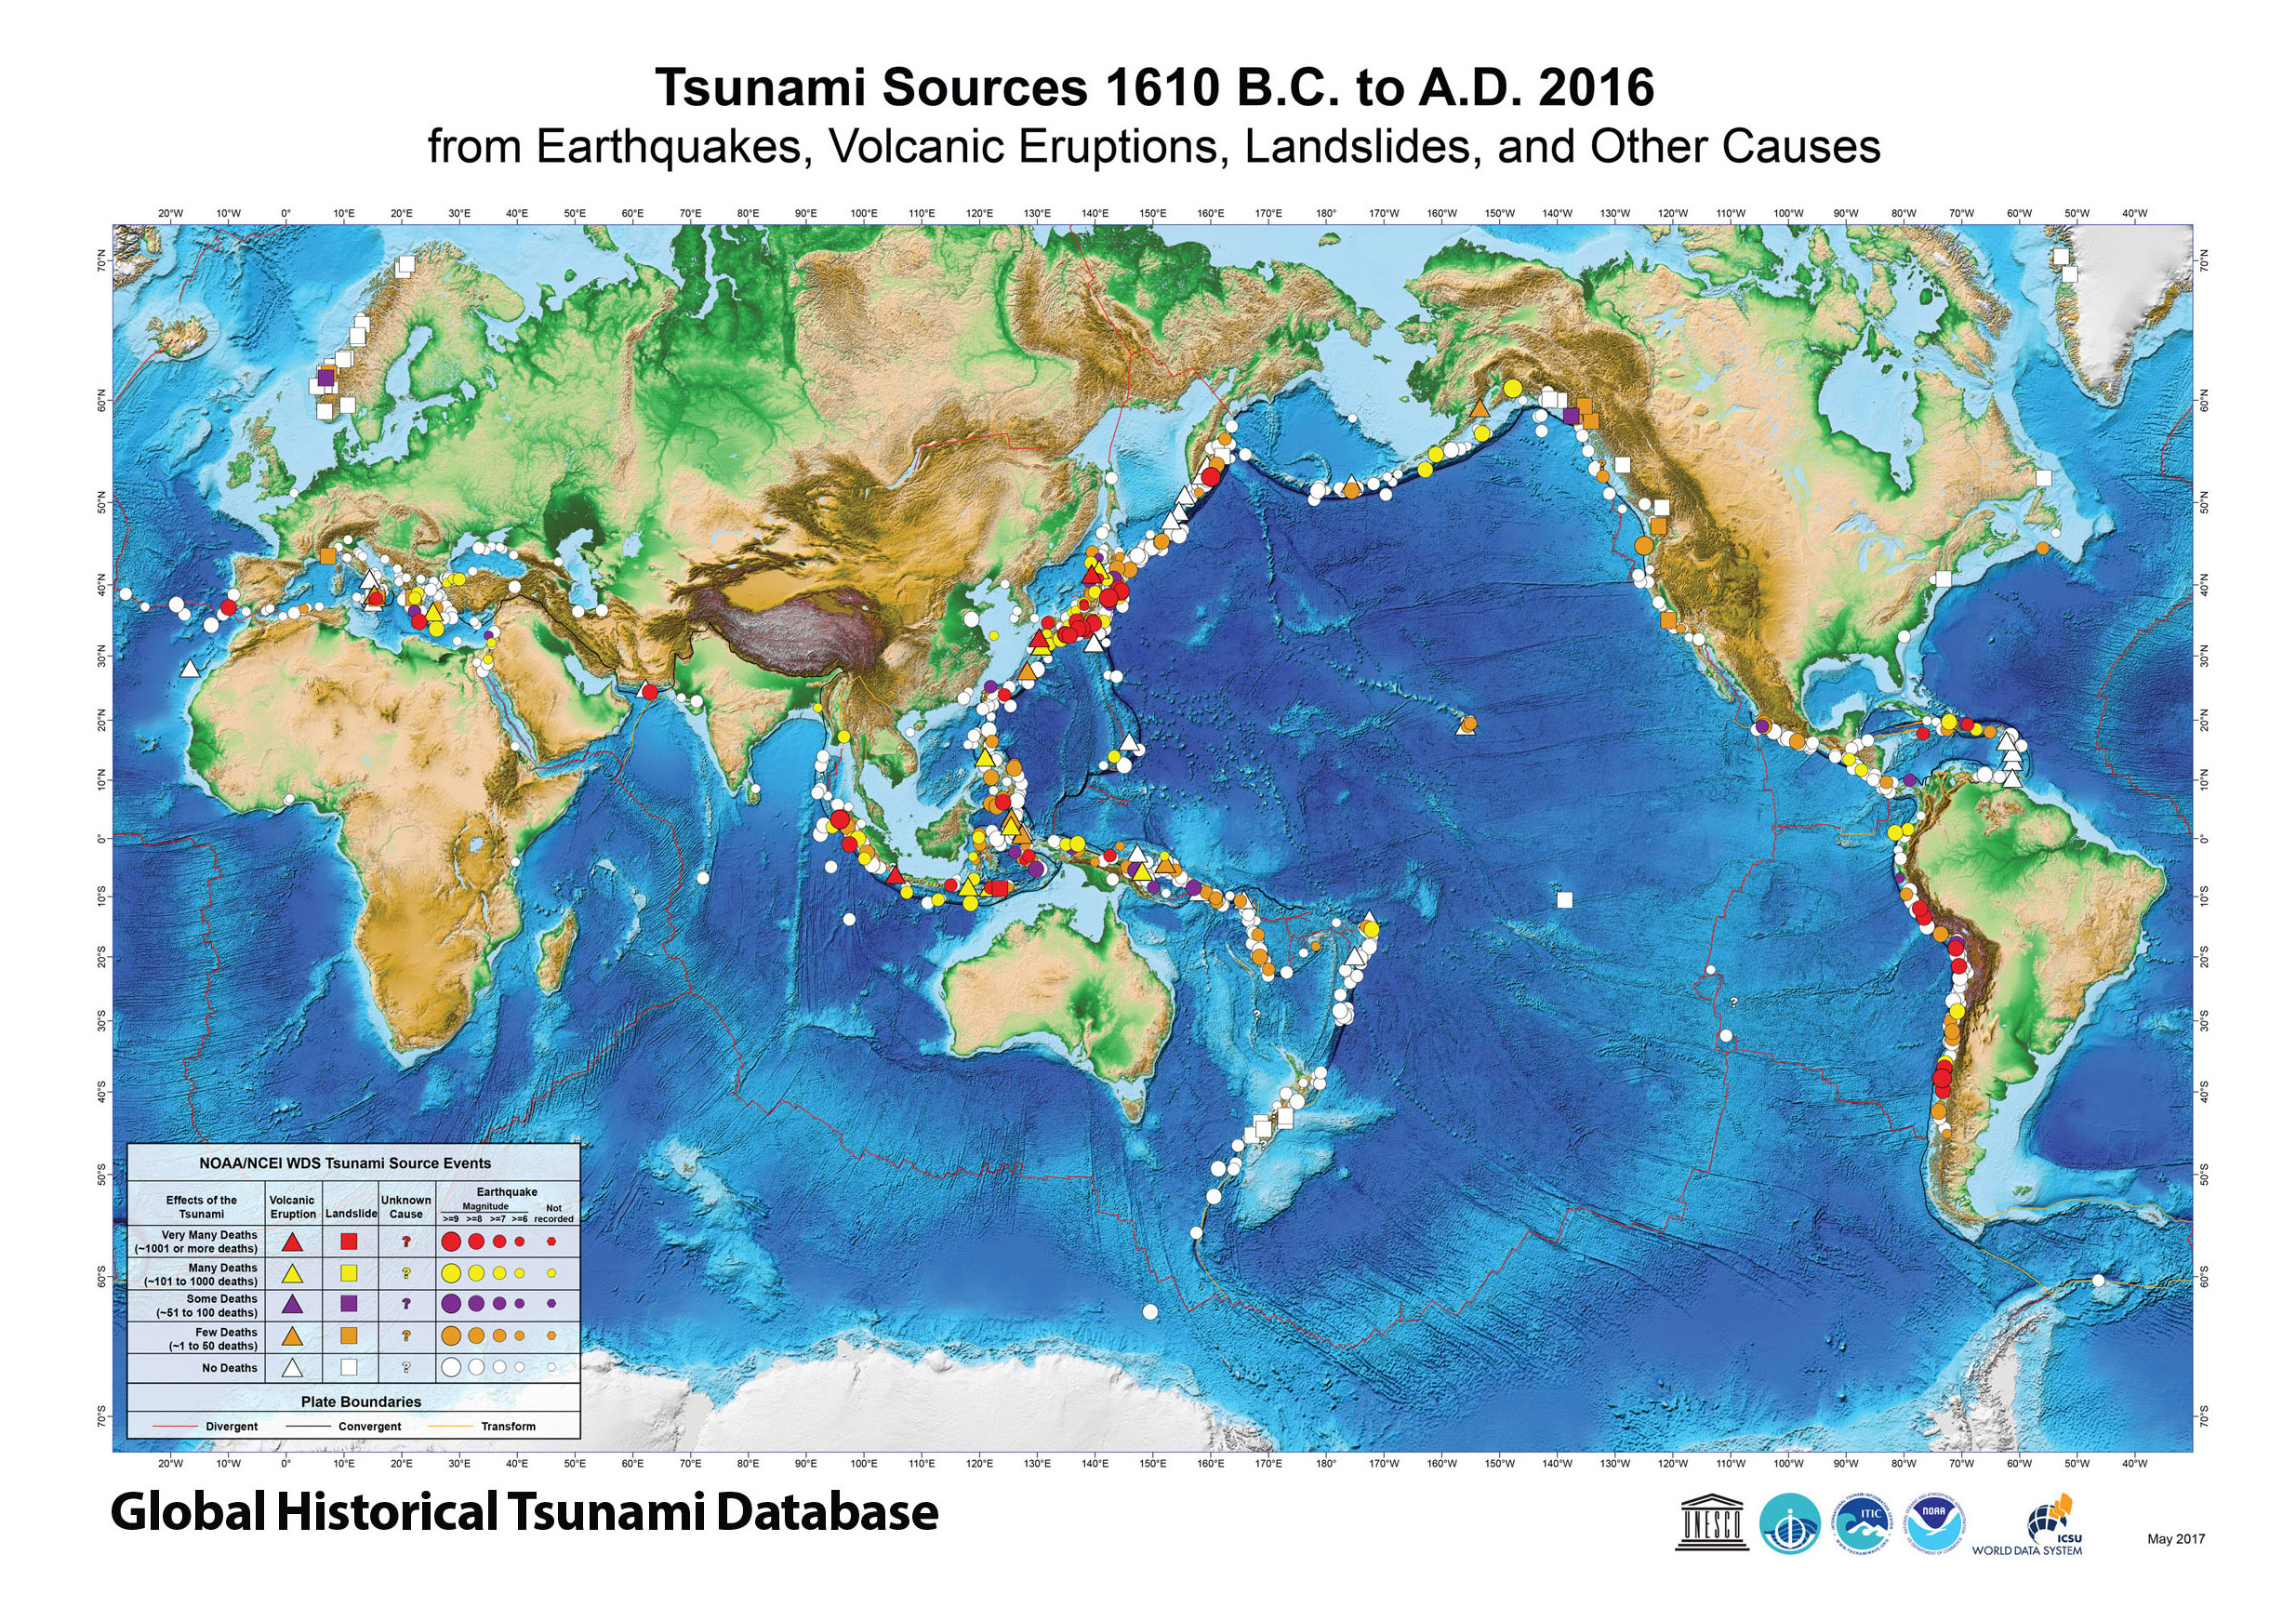 Tsunami Sources 1610 B.C. to A.D. 2016. from earthquakes, volcanic eruptions, landslides and other causes.